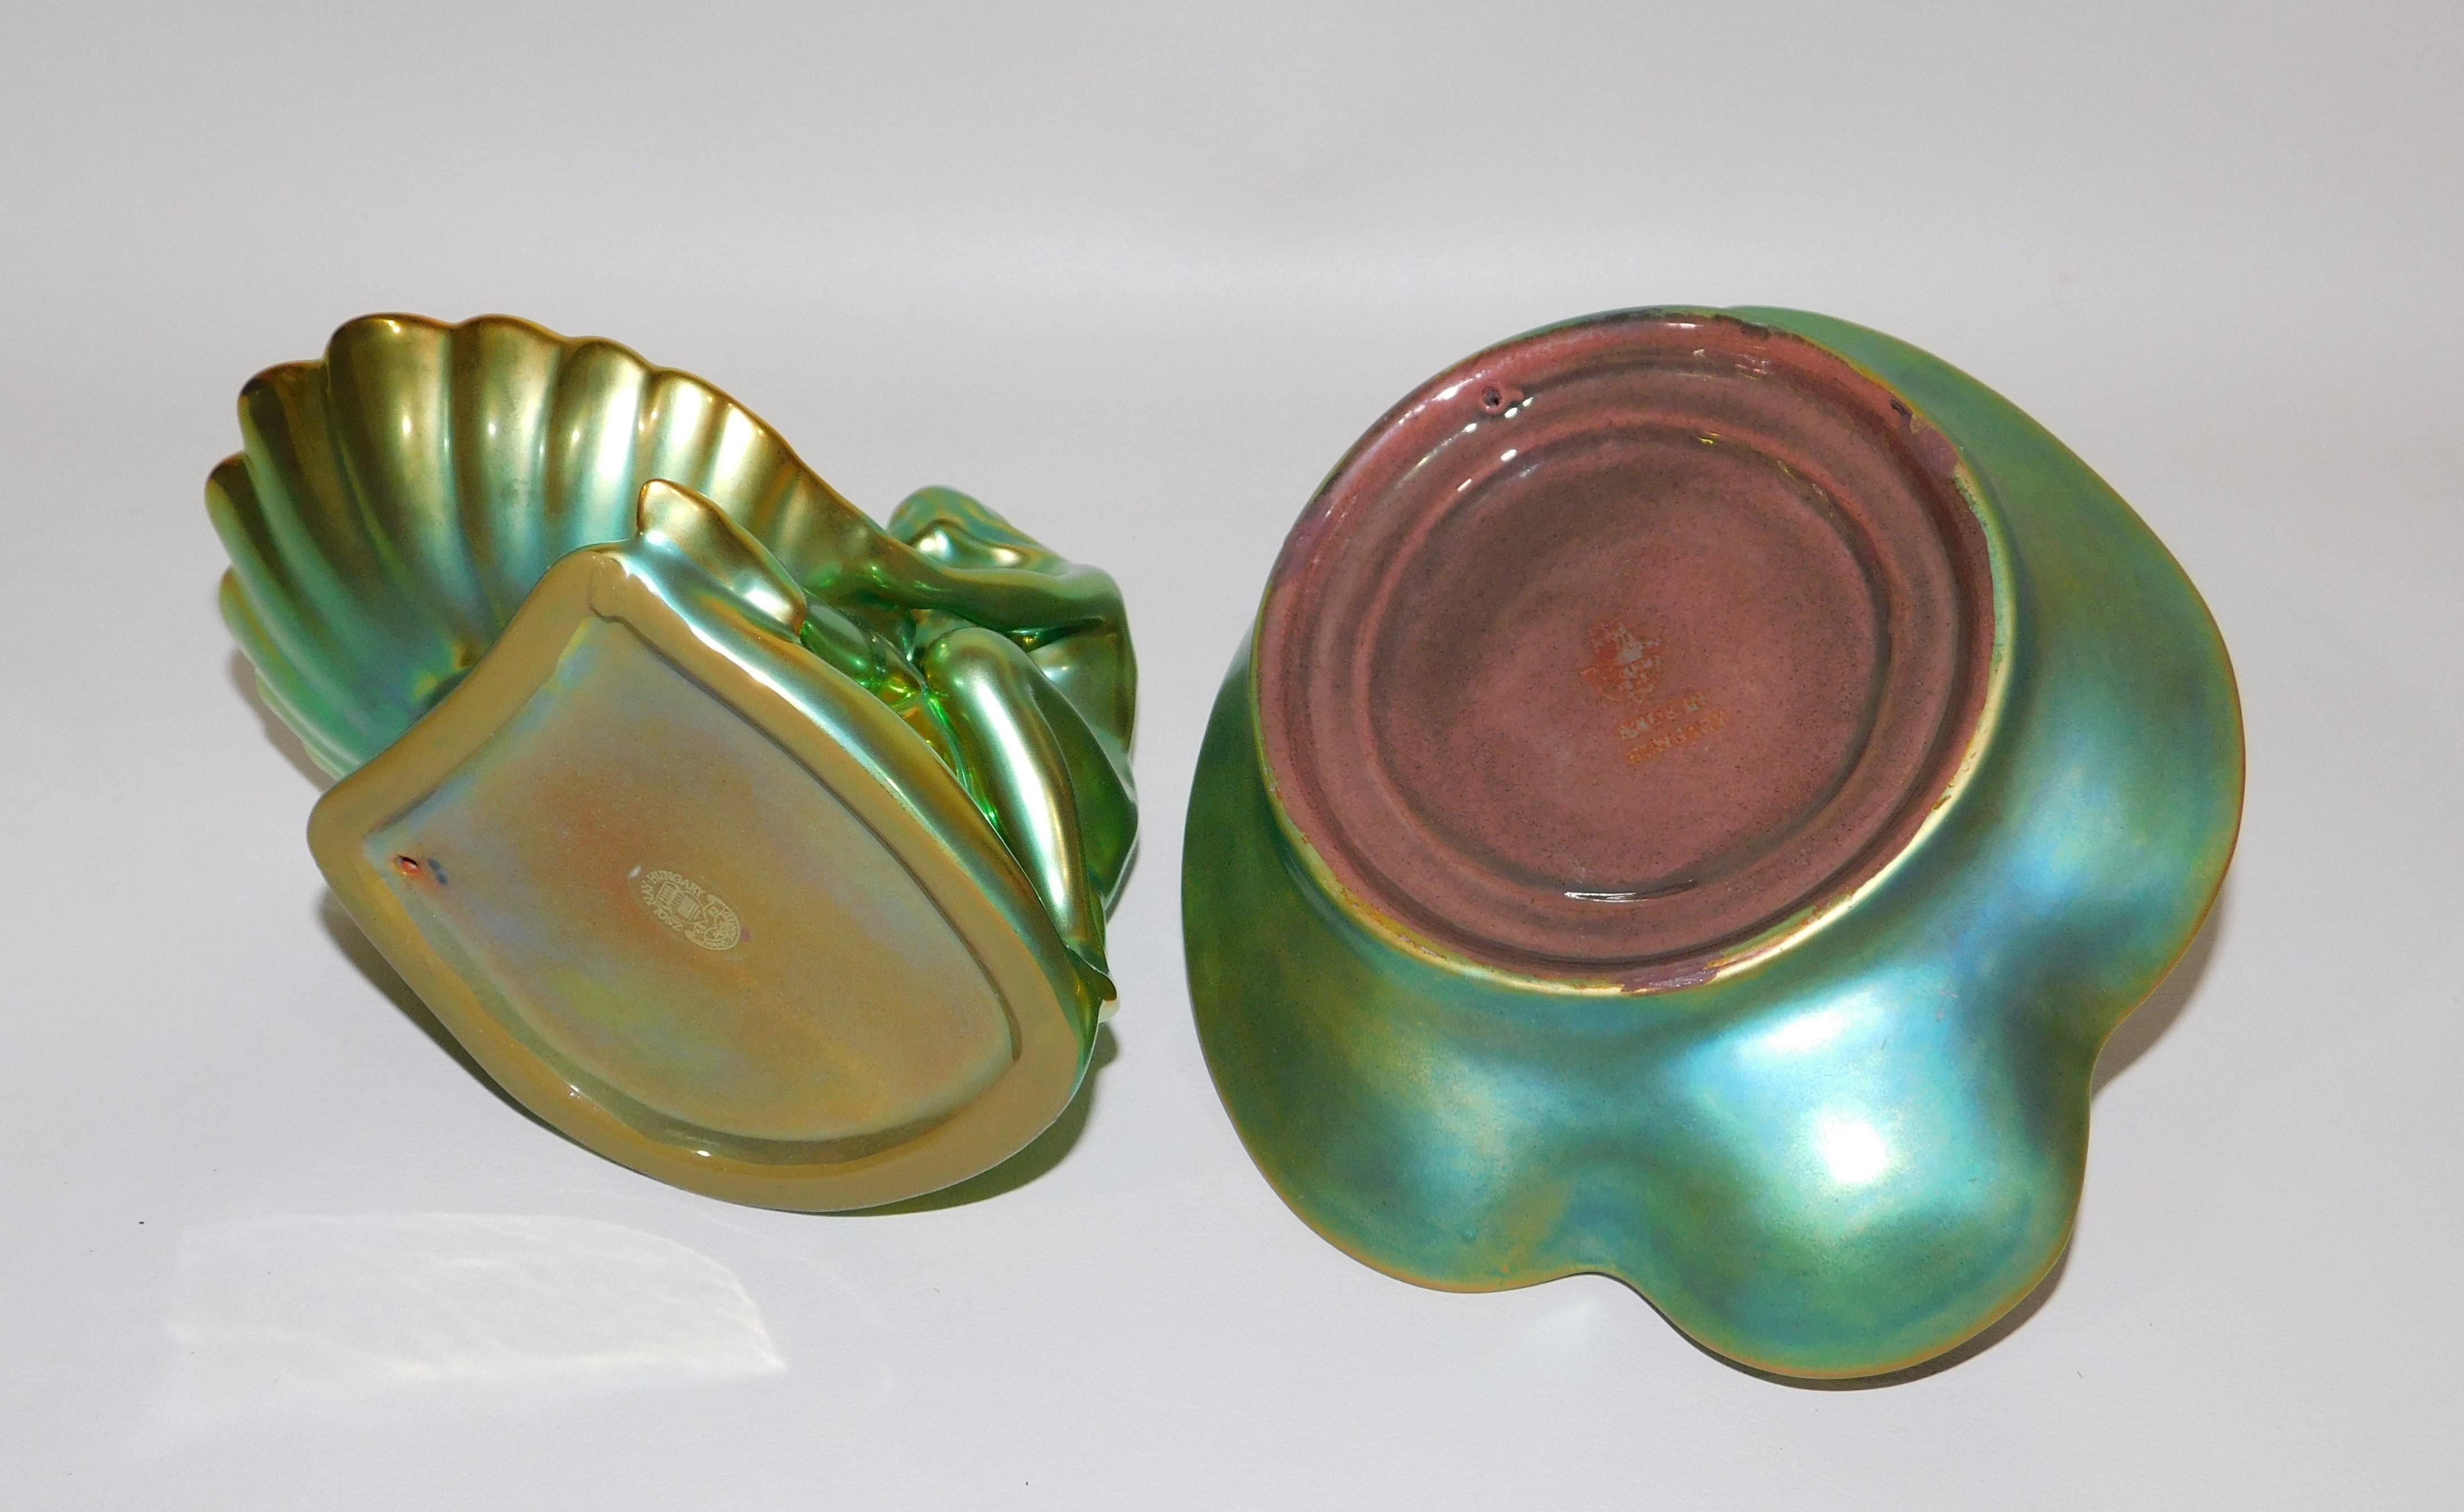 Pair of Zsolnay Decorative Ceramic Figurative Dishes with Eosin Glaze For Sale 5